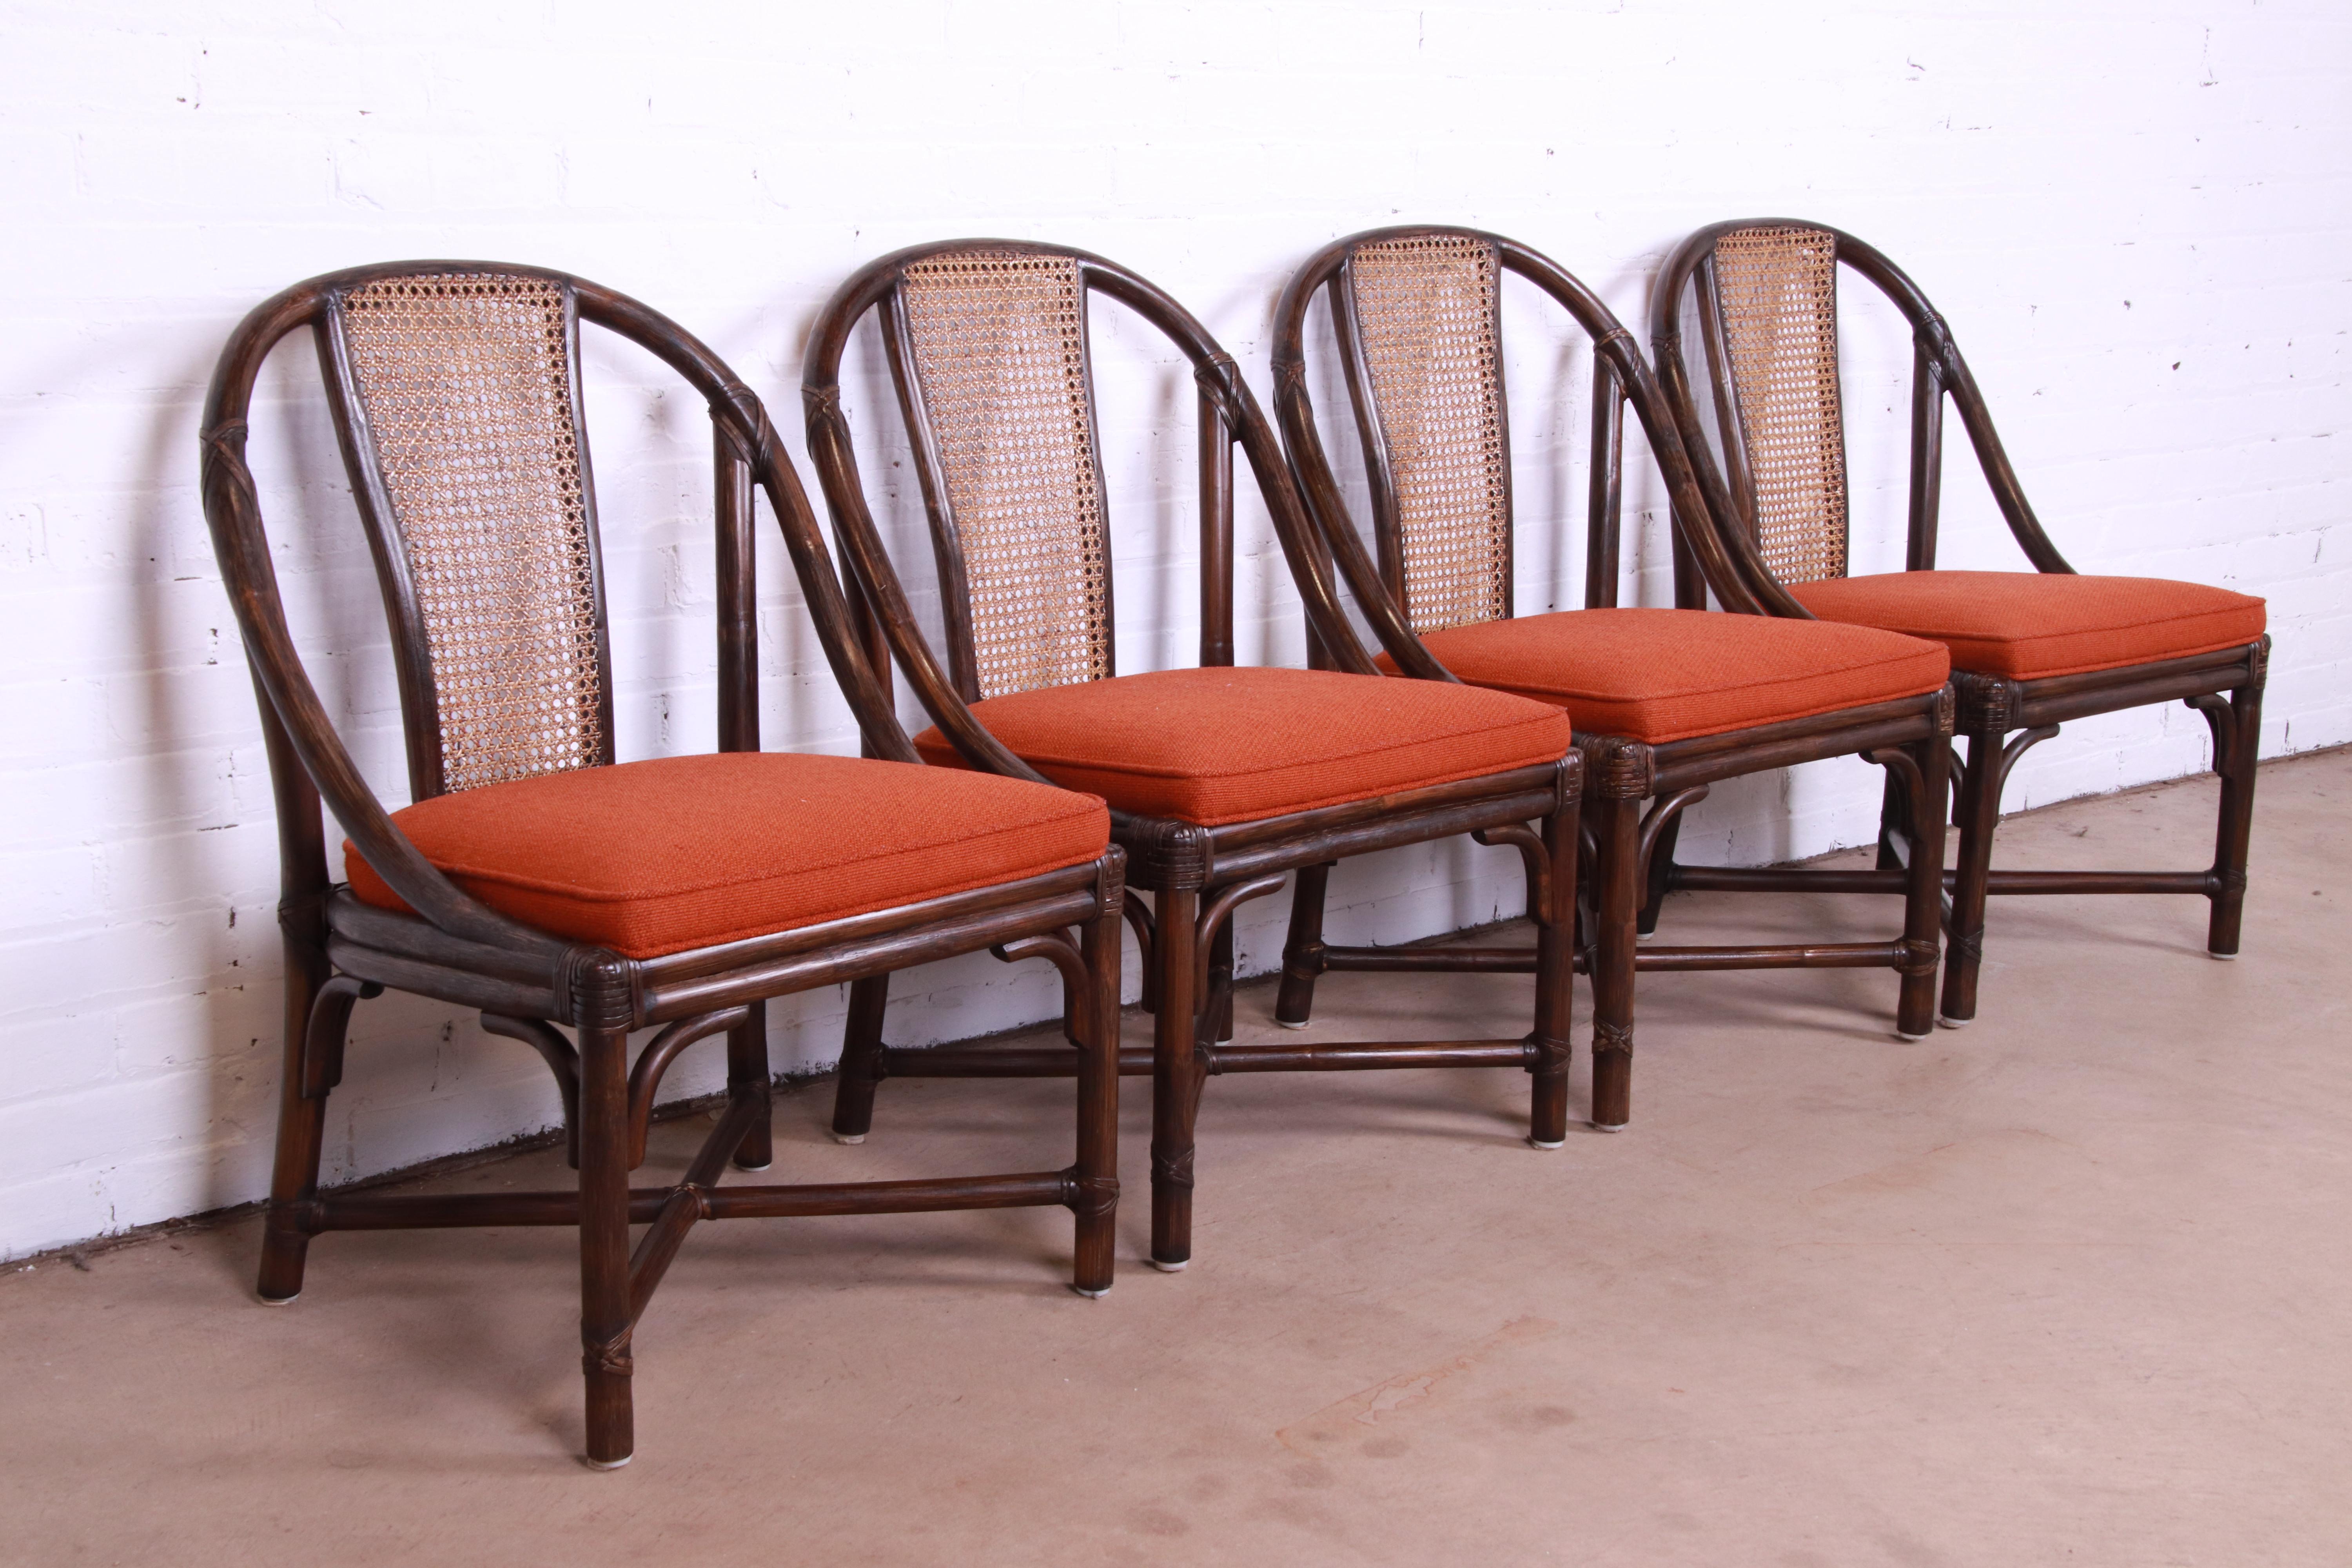 20th Century McGuire Organic Modern Bamboo, Rattan, and Cane Dining Chairs, Set of Four